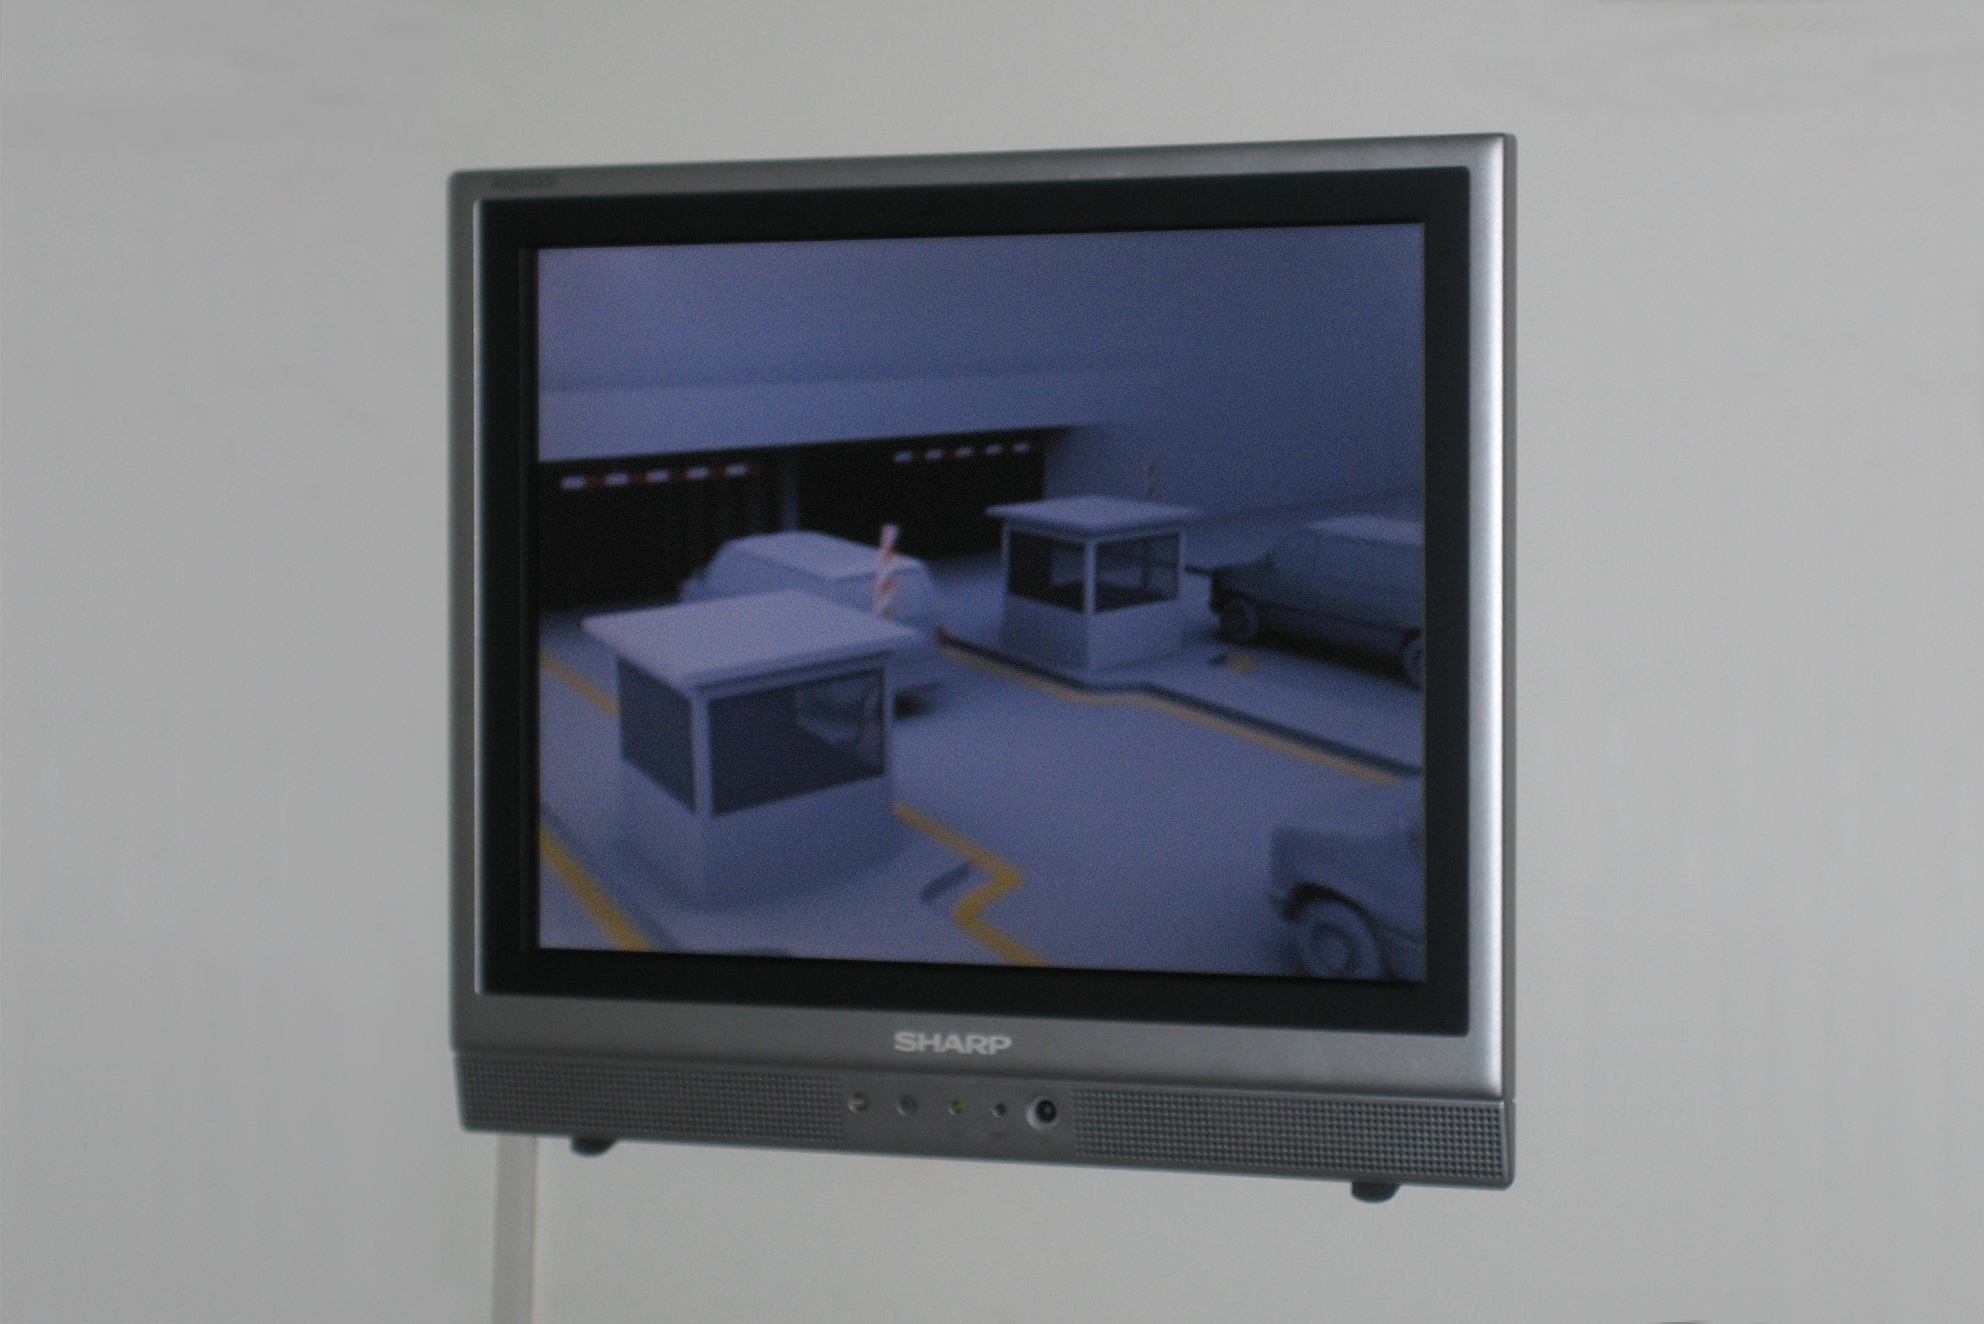 Loading, video SD, 4/3, 576i, 42”, loop, 2006, in collaboration with Swann Thommen